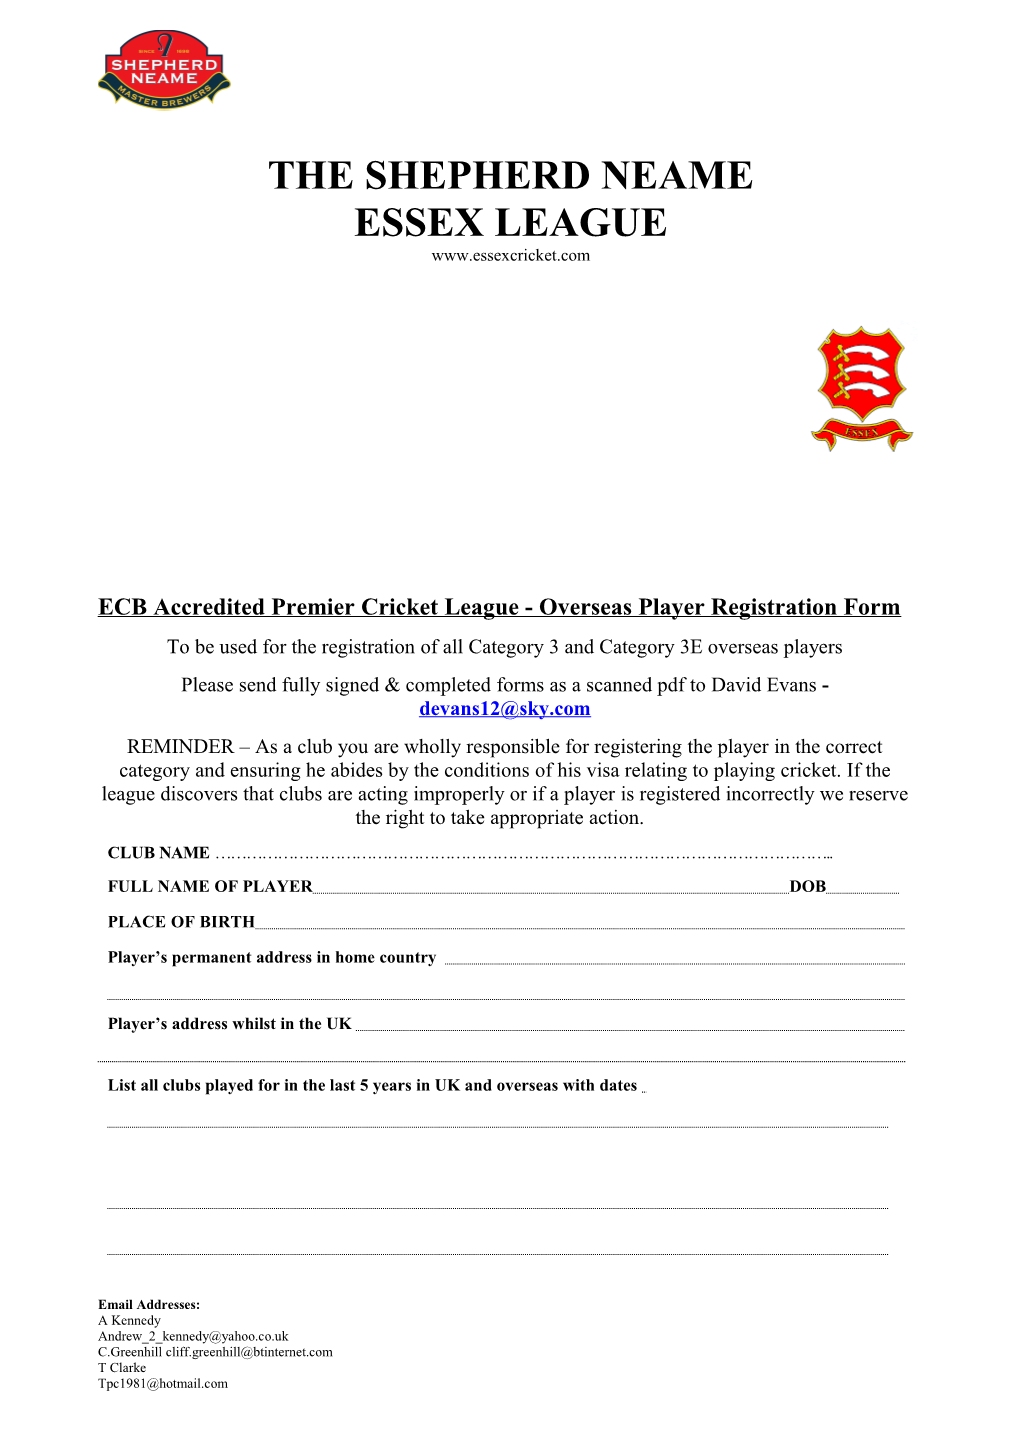 ECB Accredited Premier Cricket League - Overseas Player Registration Form